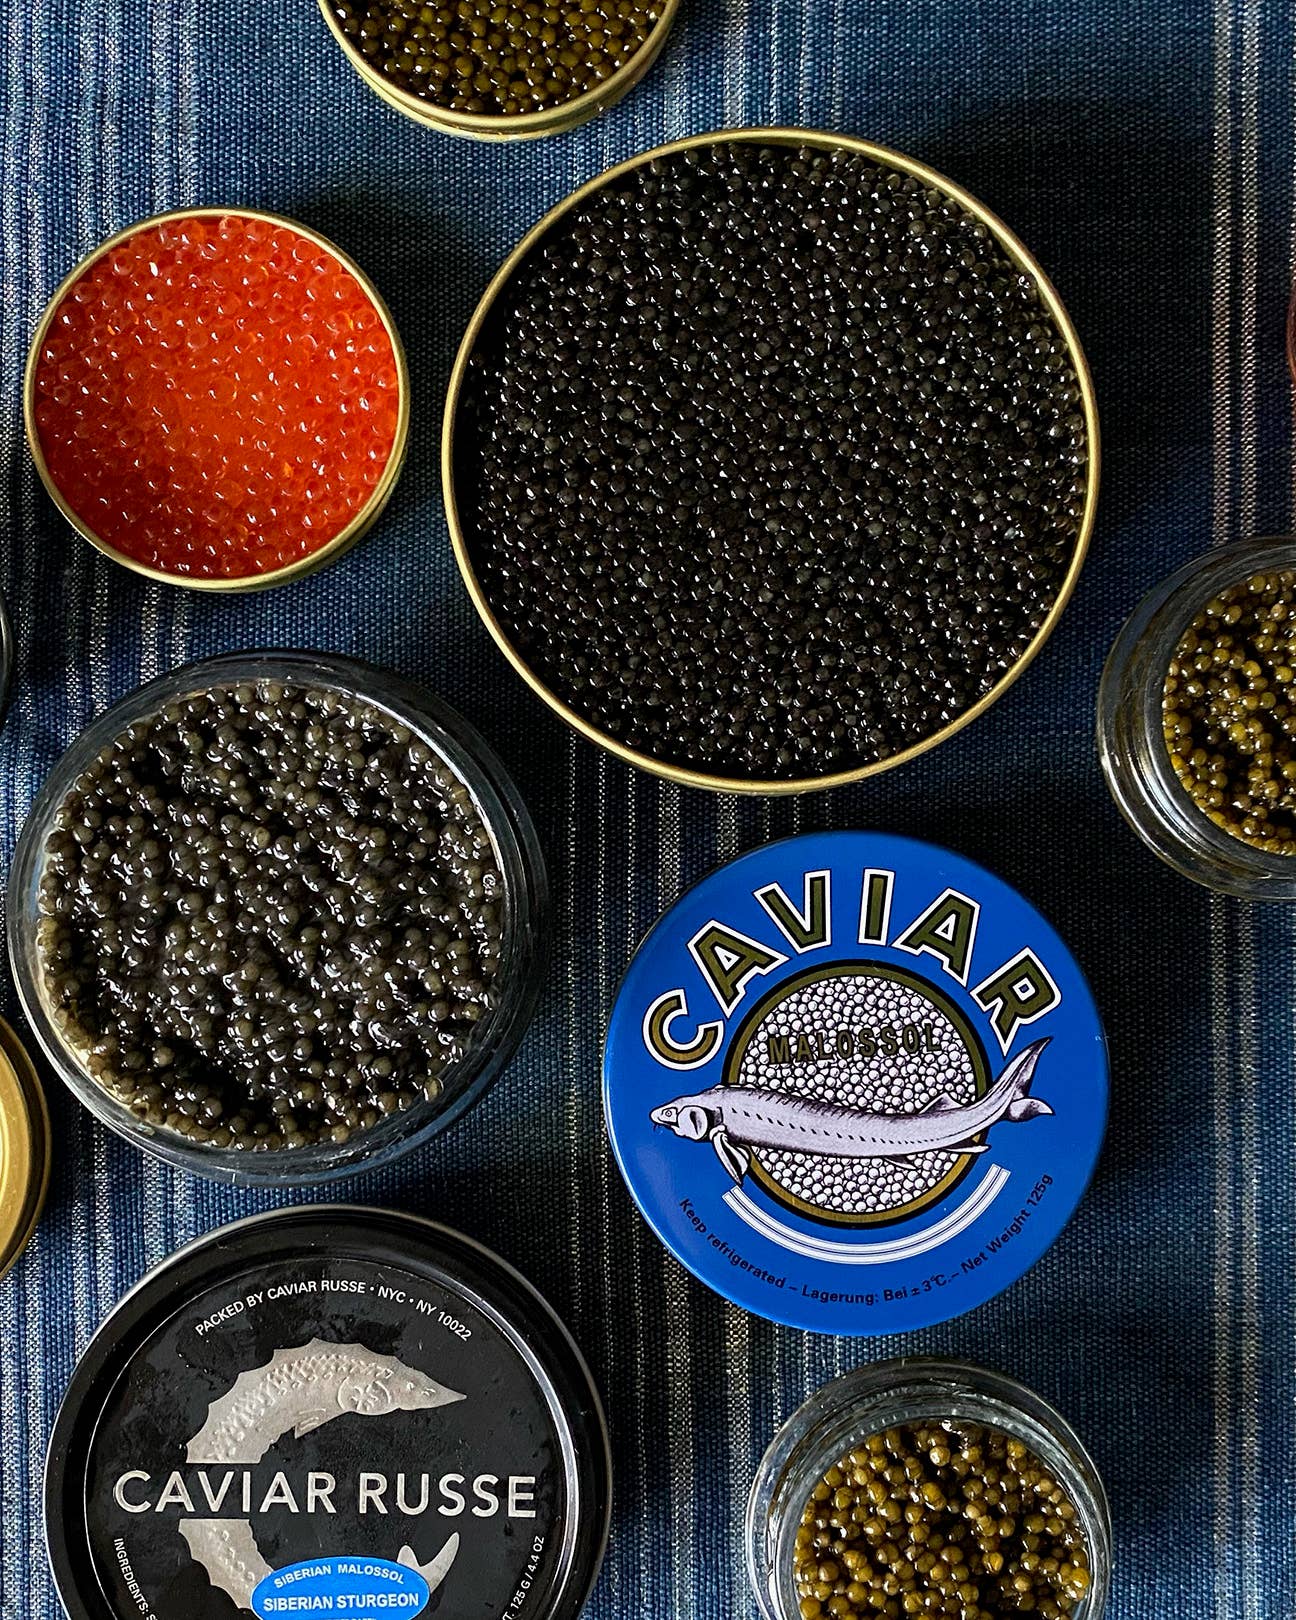 How Caviar is made: Everything you need to know.